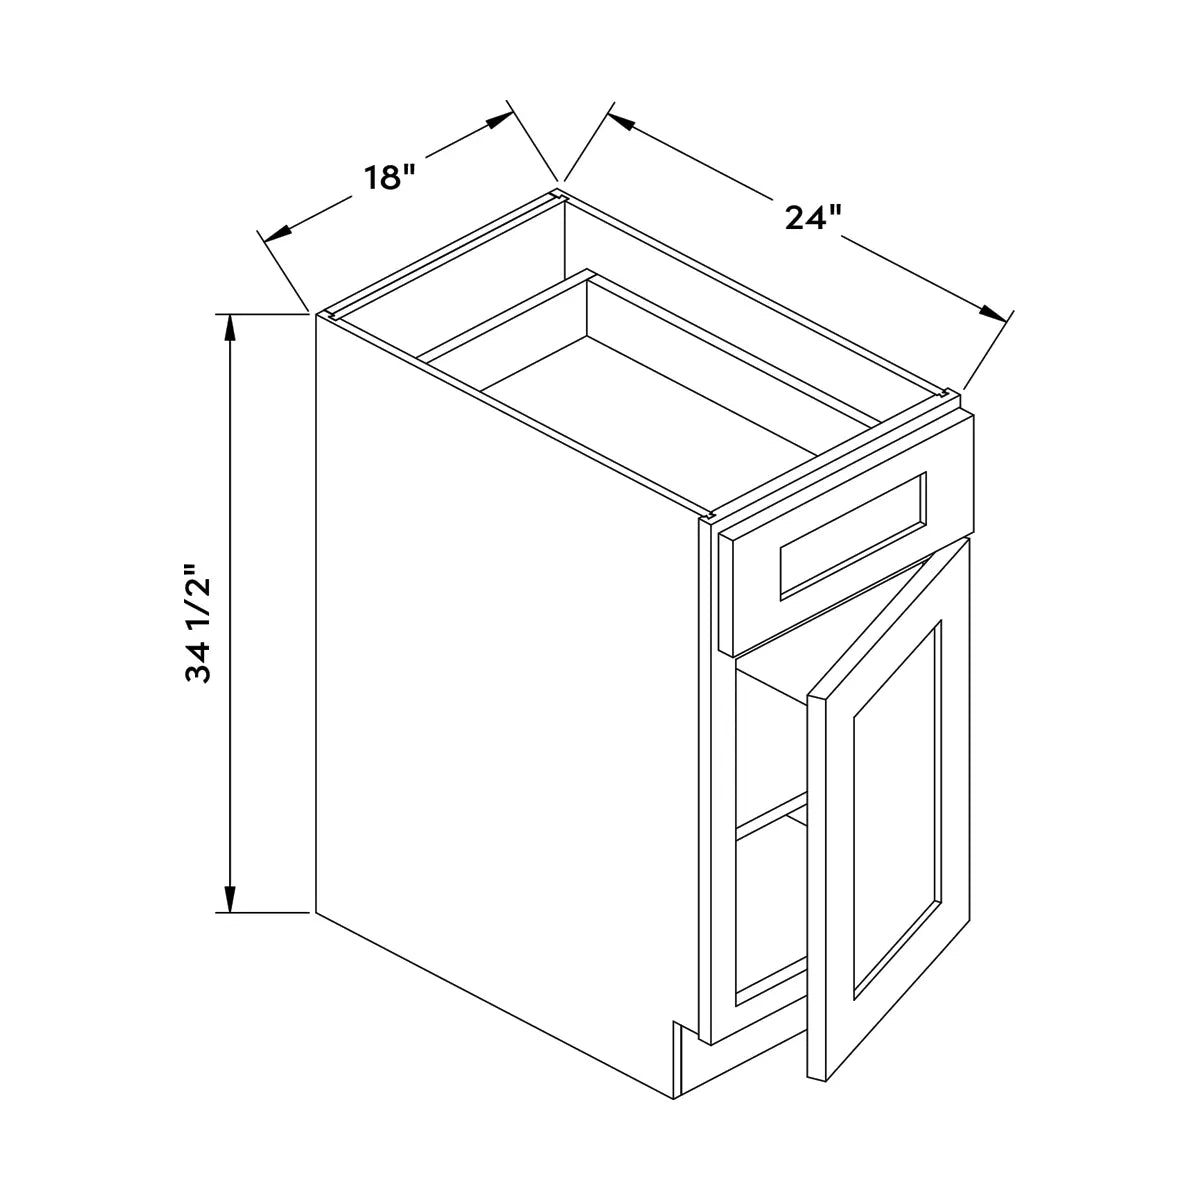 Craft Cabinetry Shaker Aqua 18”W Base Cabinet Image Specifications